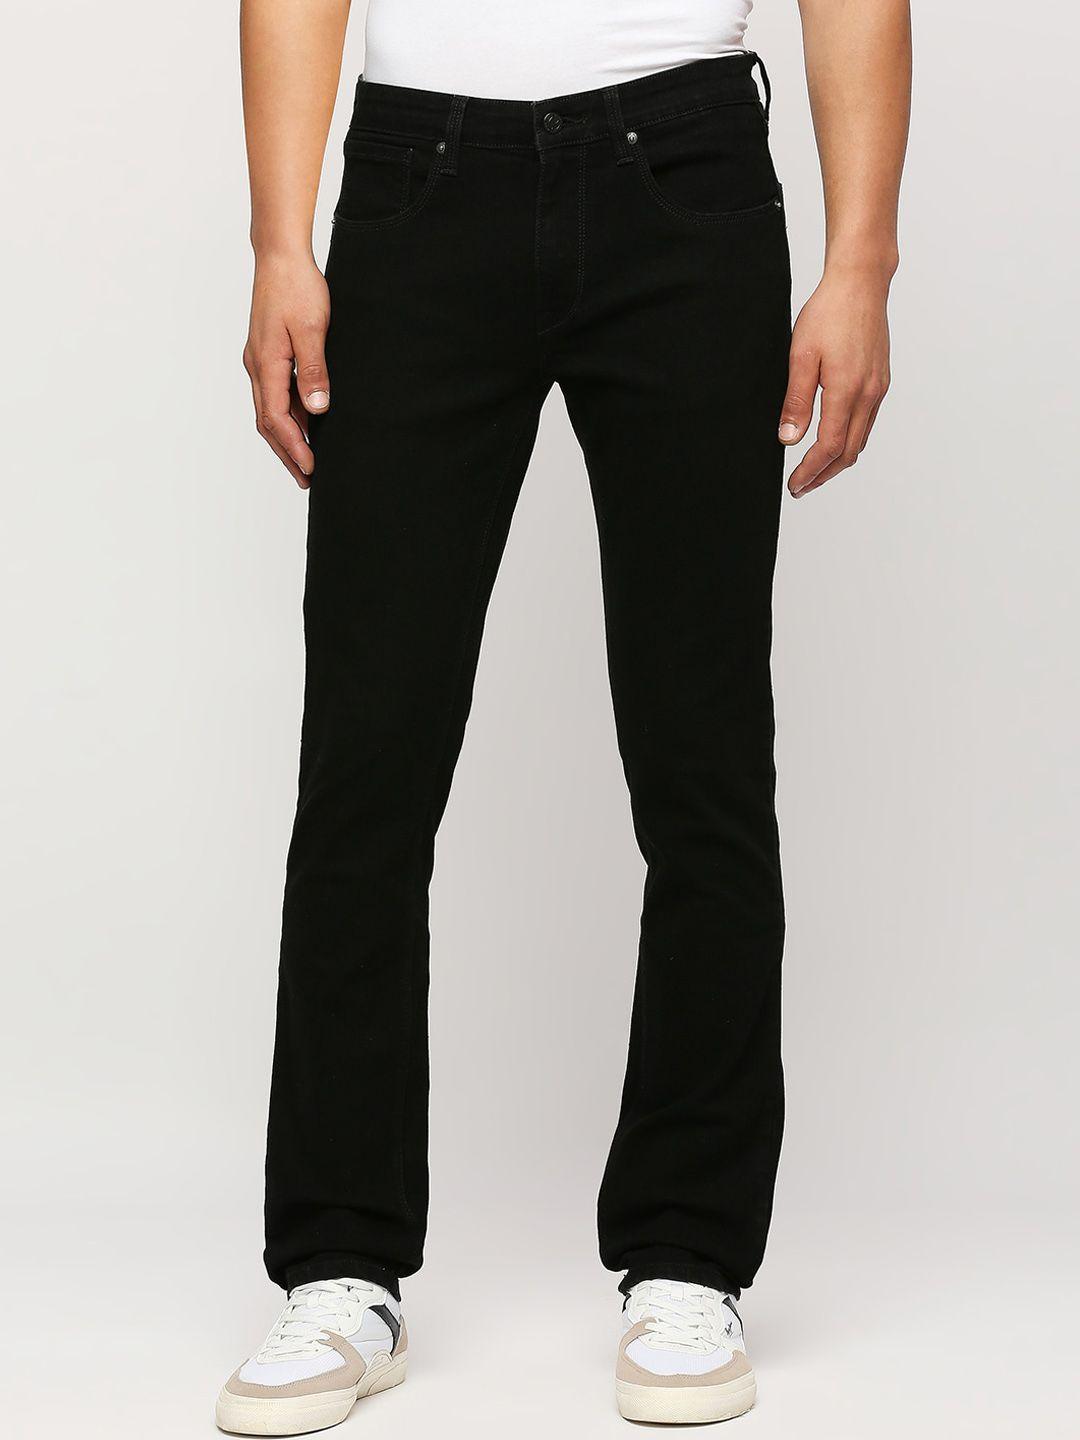 pepe jeans men clean look mid-rise slim fit stretchable jeans